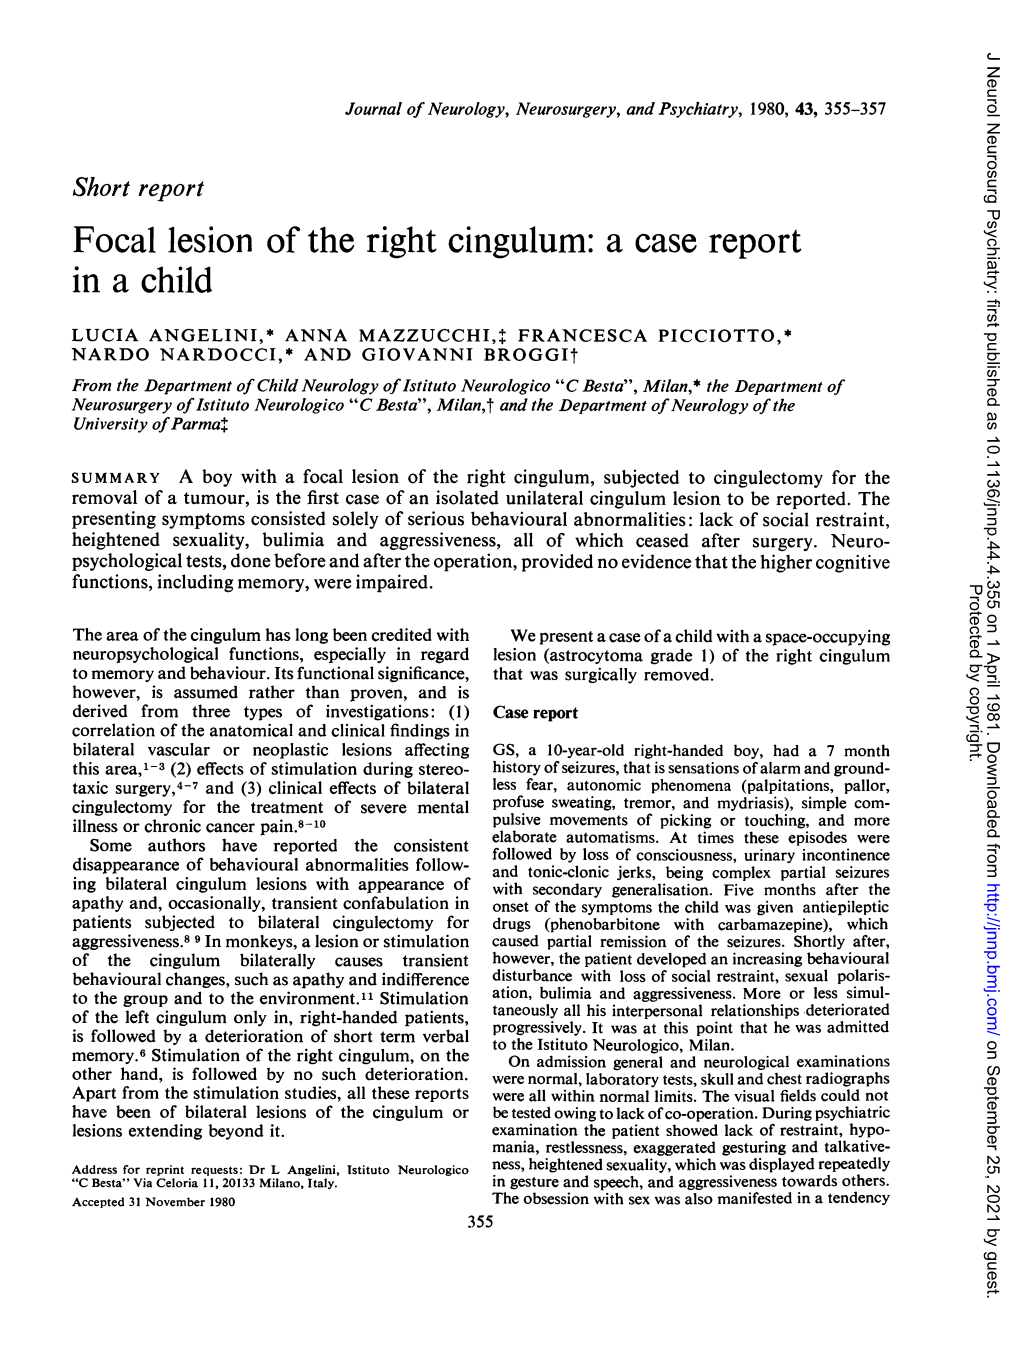 Focal Lesion of the Right Cingulum: a Case Report in a Child